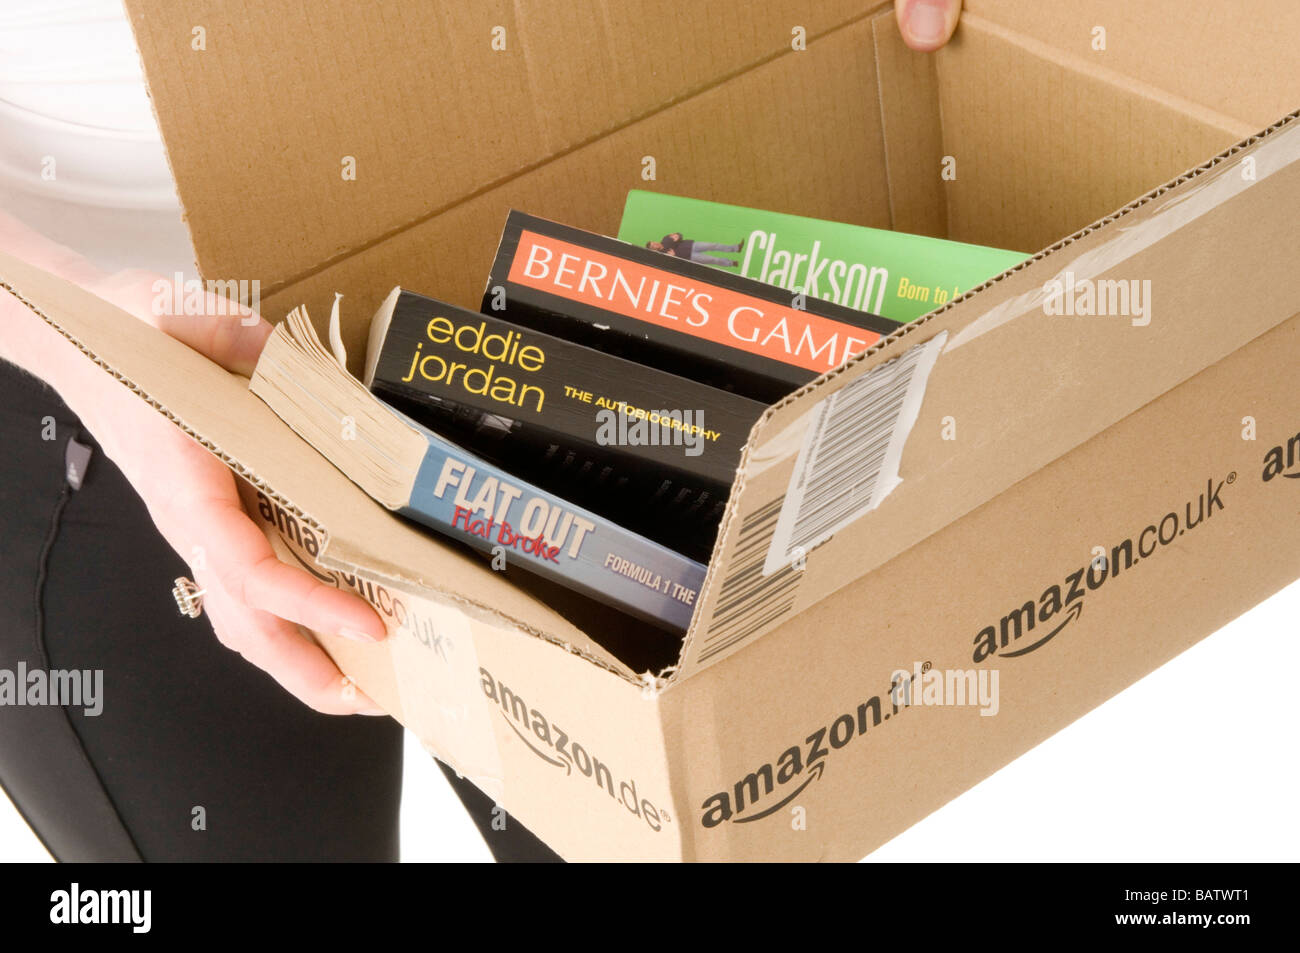 amazon online on line book retailer shop store books bookshop bookstore mail order shipping box boxes package packages parcel pa Stock Photo